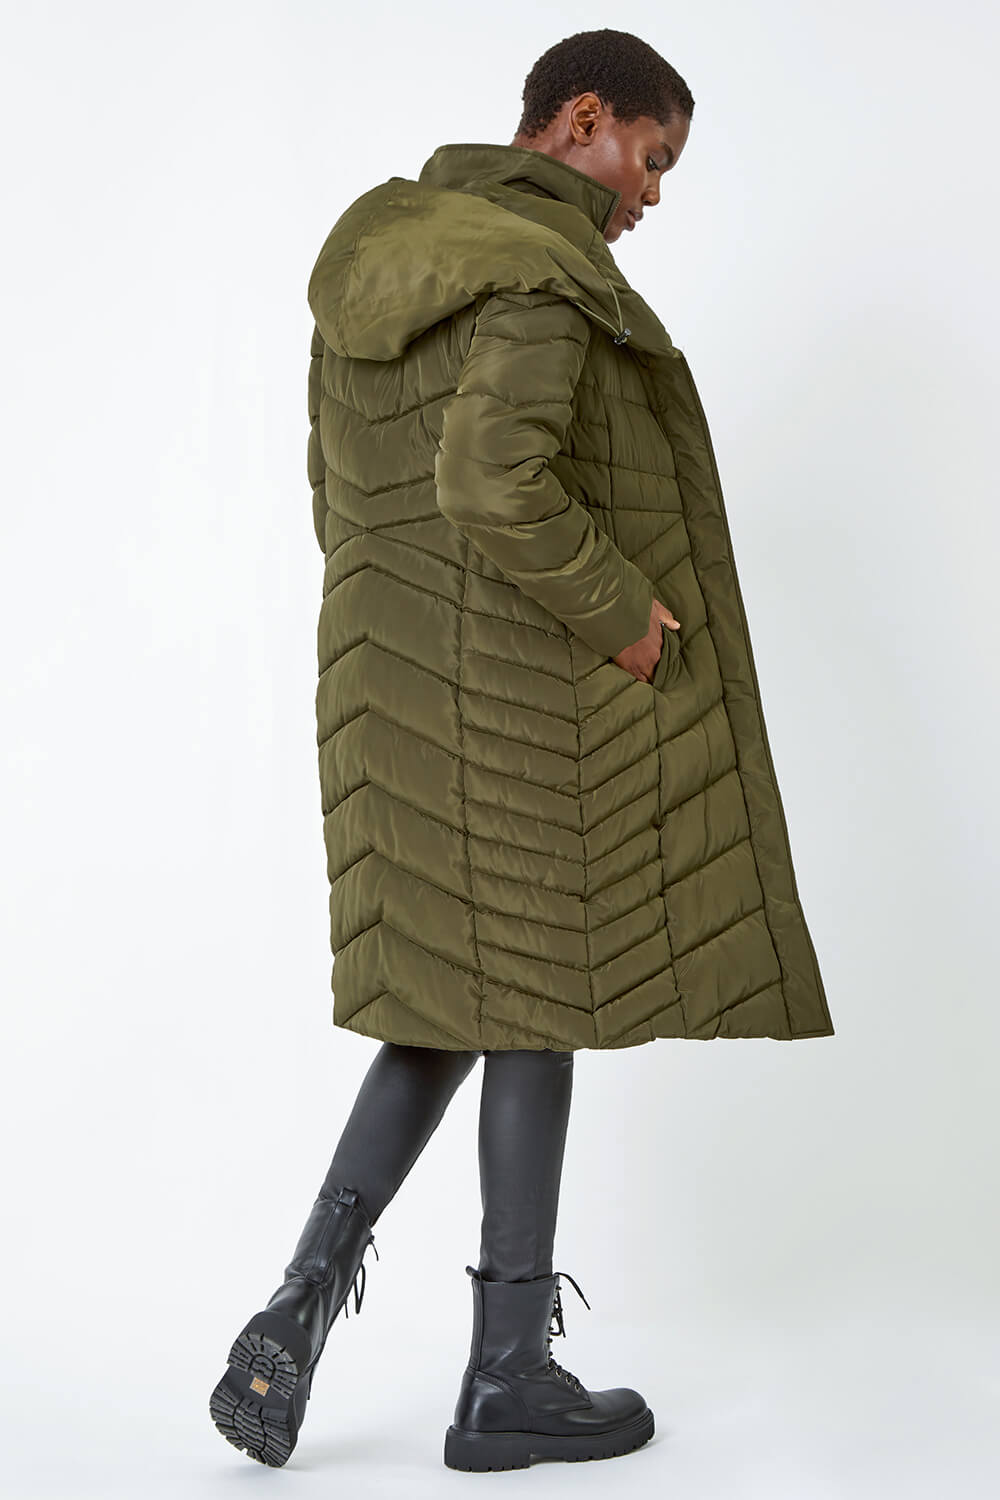 KHAKI Hooded Quilted Longline Coat, Image 3 of 5